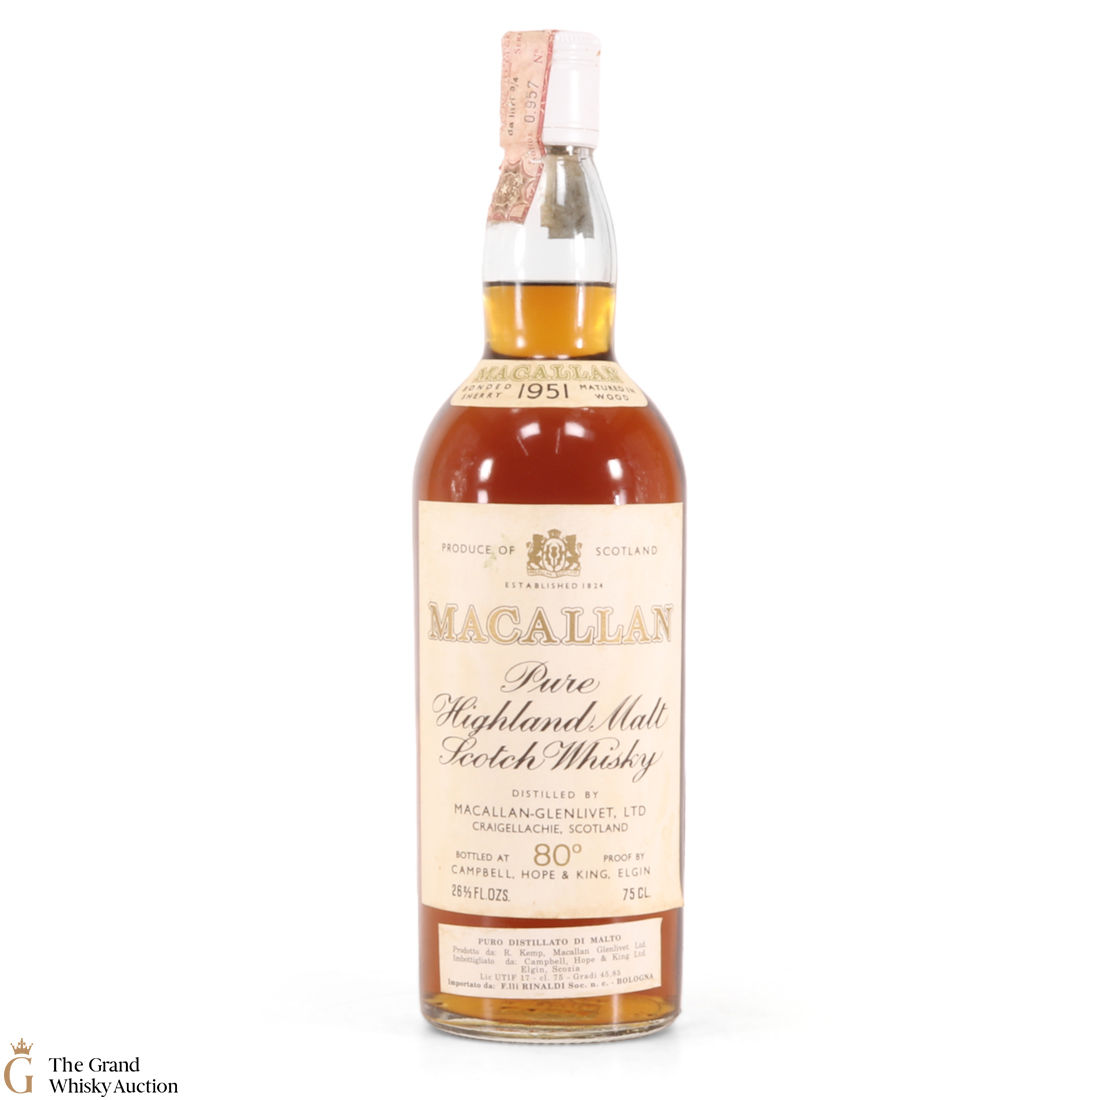 Macallan 1951 Campbell Hope King 75cl Auction The Grand Whisky Auction